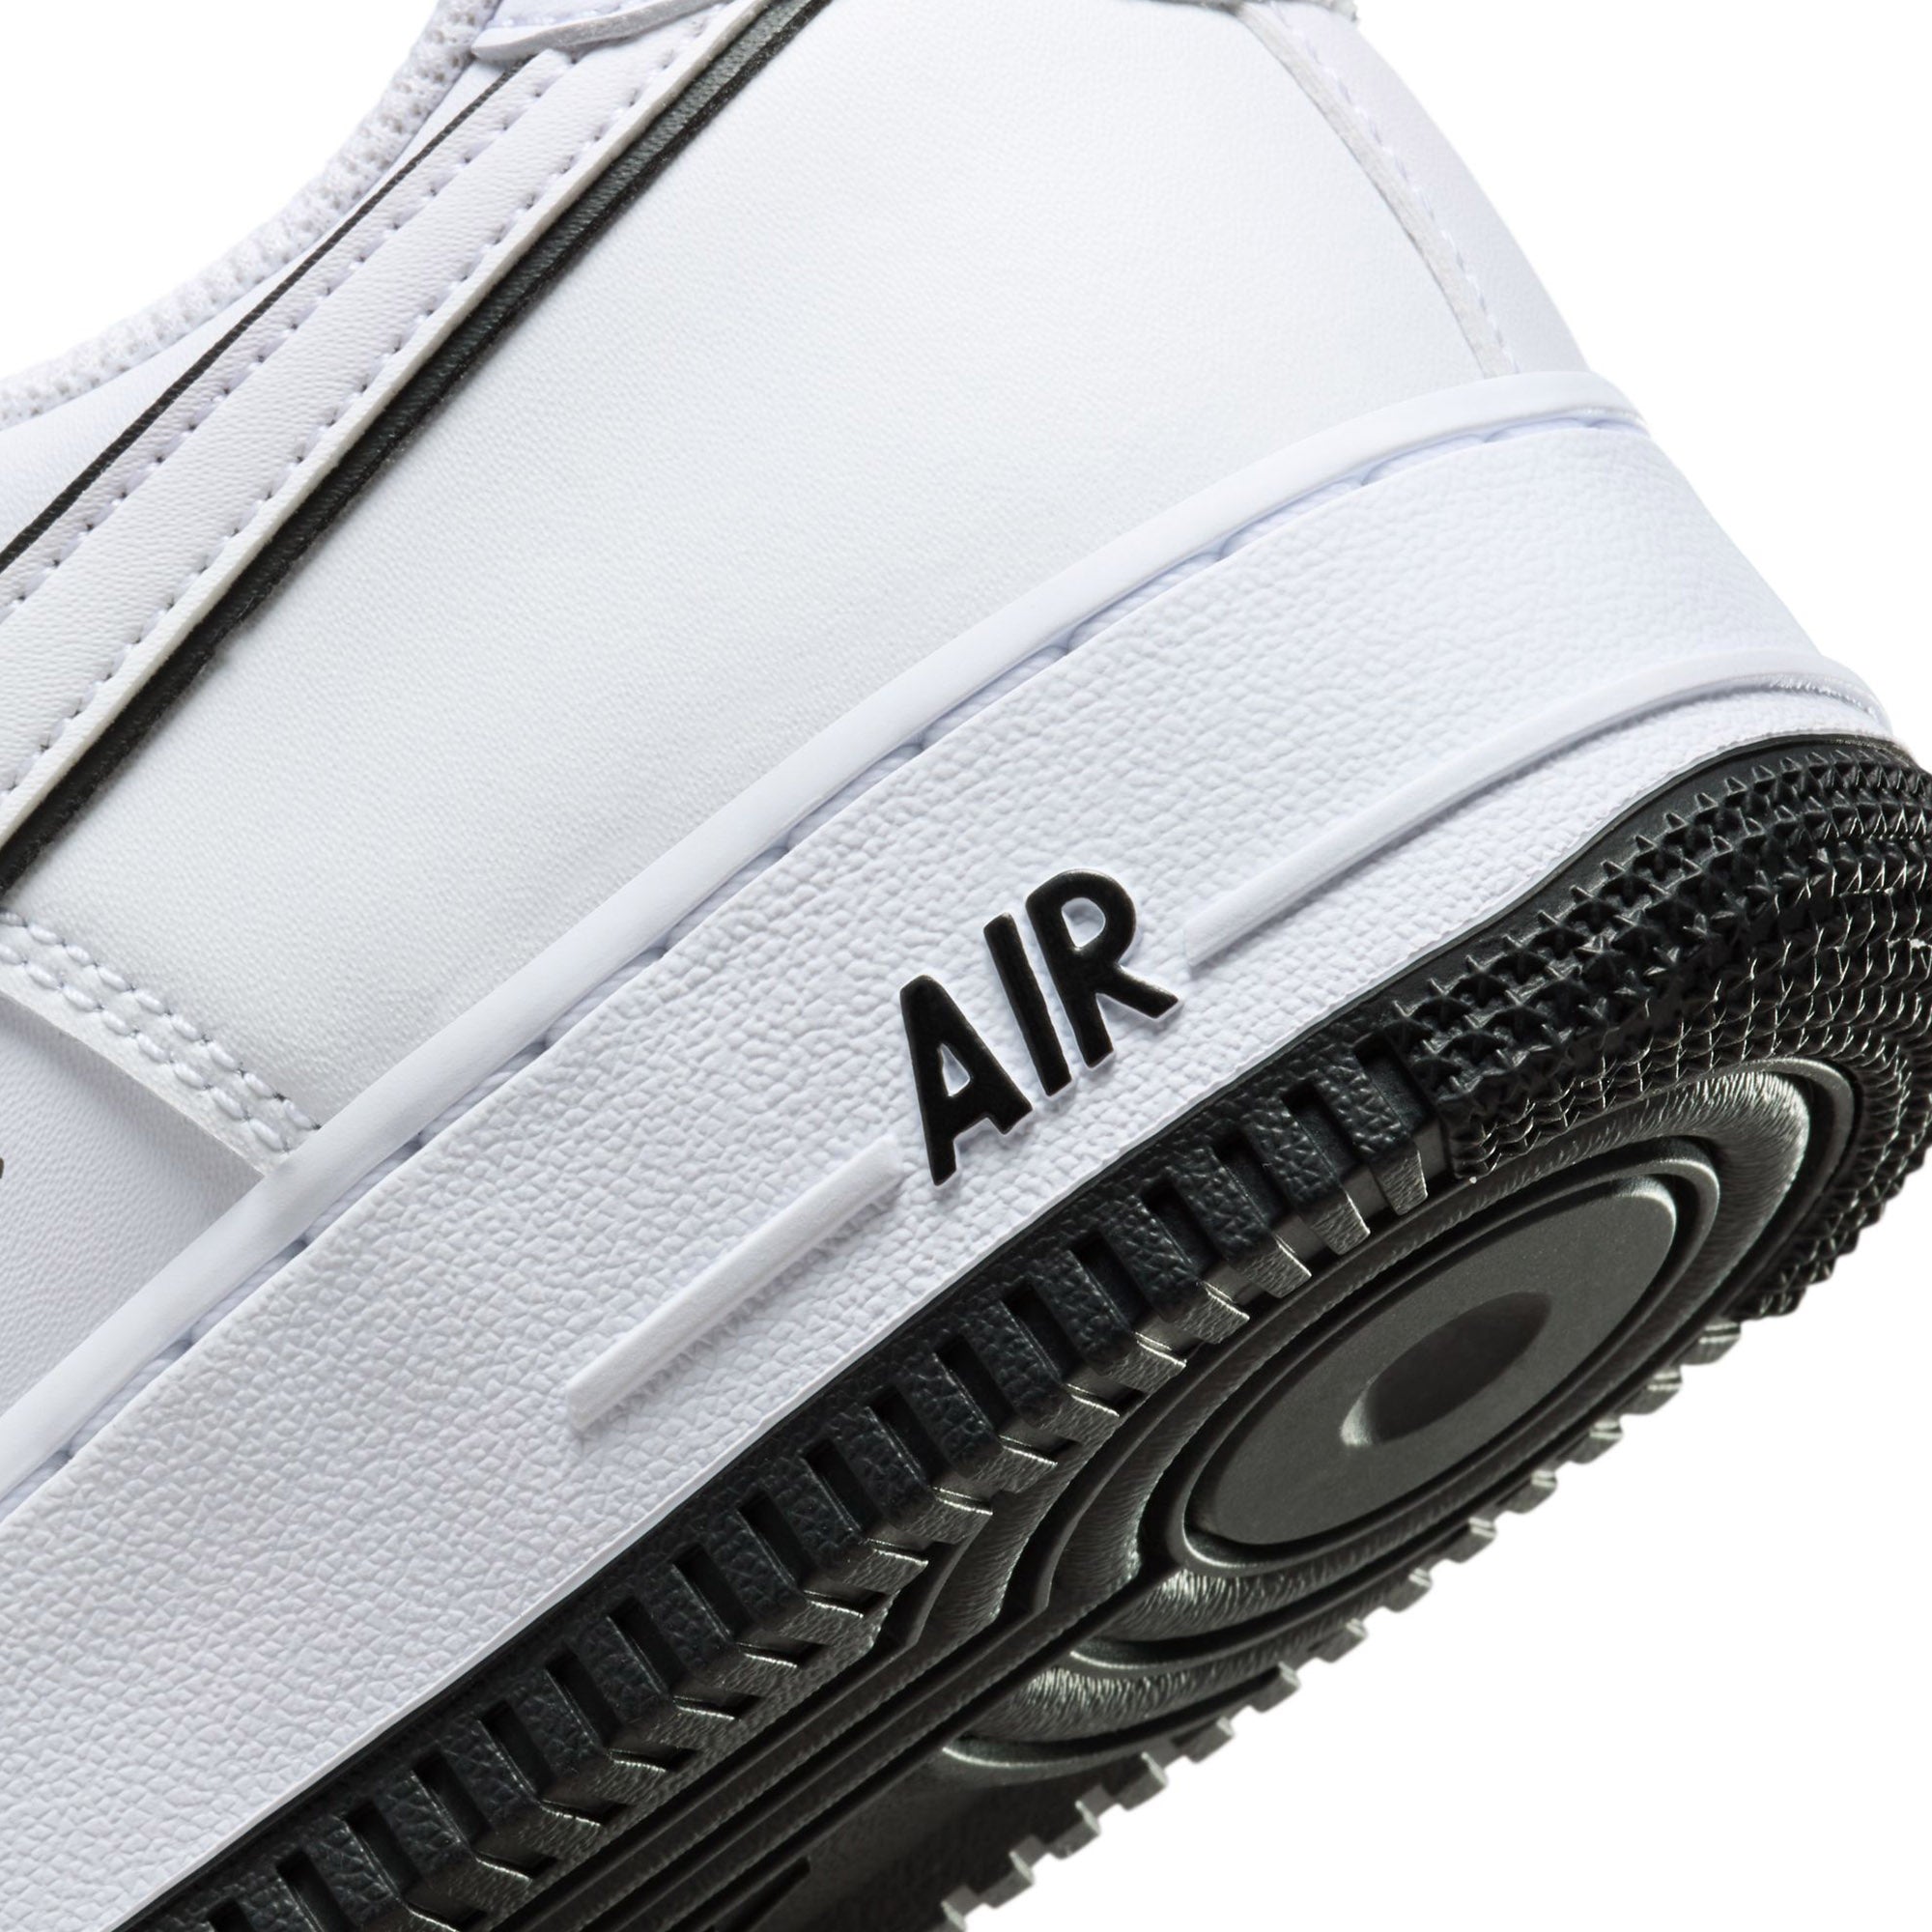 Nike Air Force 1 '07 Shoes 'Multi' – Extra Butter